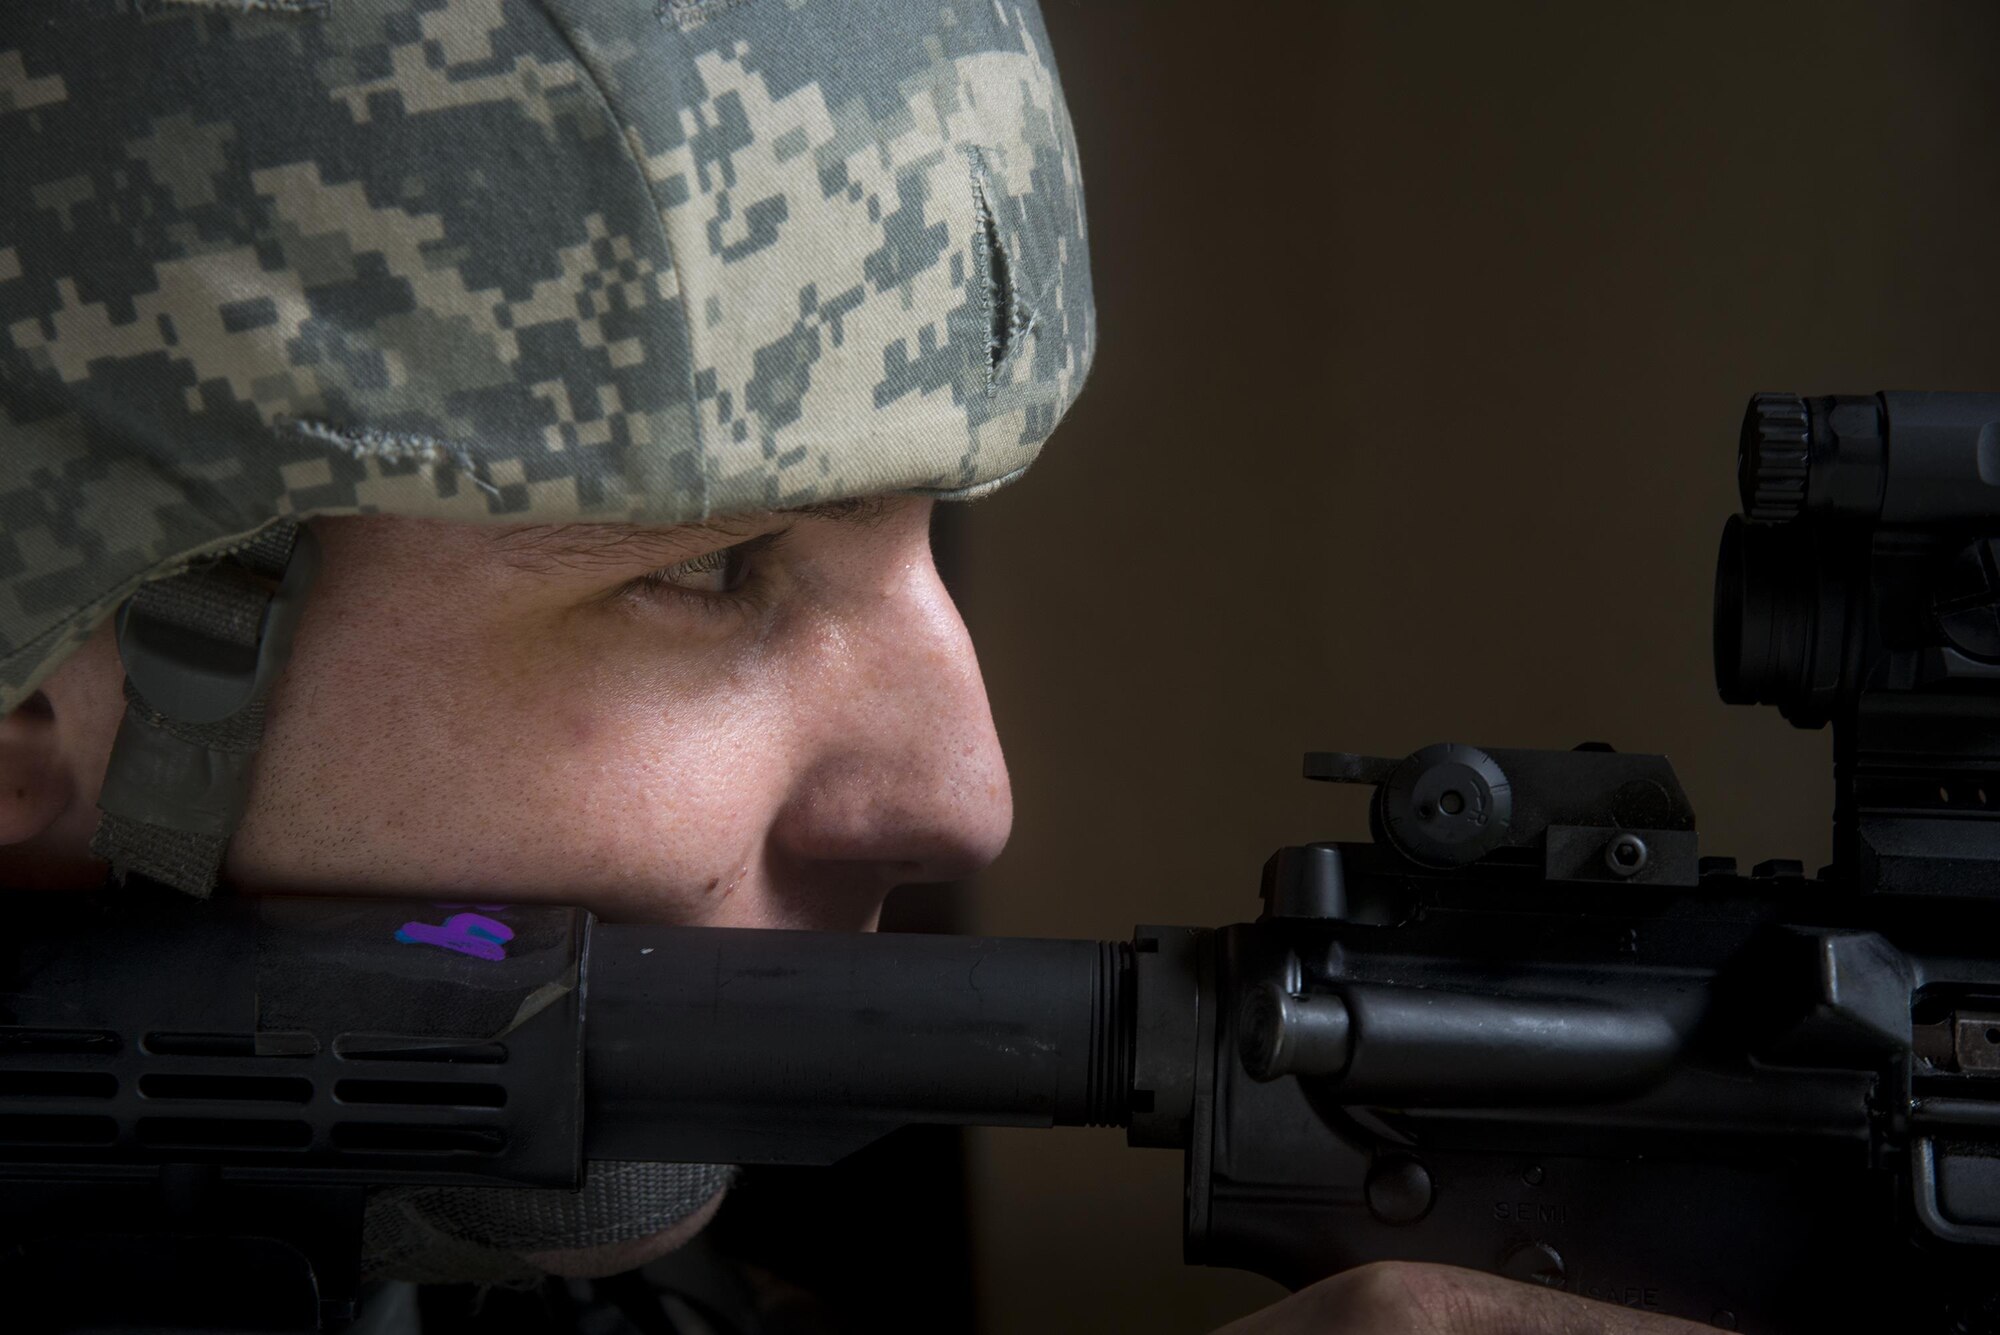 Senior Airman Dennis Capps, 23d Security Forces Squadron patrolman, guards an entry control point during an emergency response exercise, Aug. 22, 2017, at Moody Air Force Base, Ga. The purpose of this active-shooter exercise was to inspect the recovery phase of an emergency situation while maintaining realism as members still responded as normal. (U.S. Air Force photo by Airman 1st Class Erick Requadt)